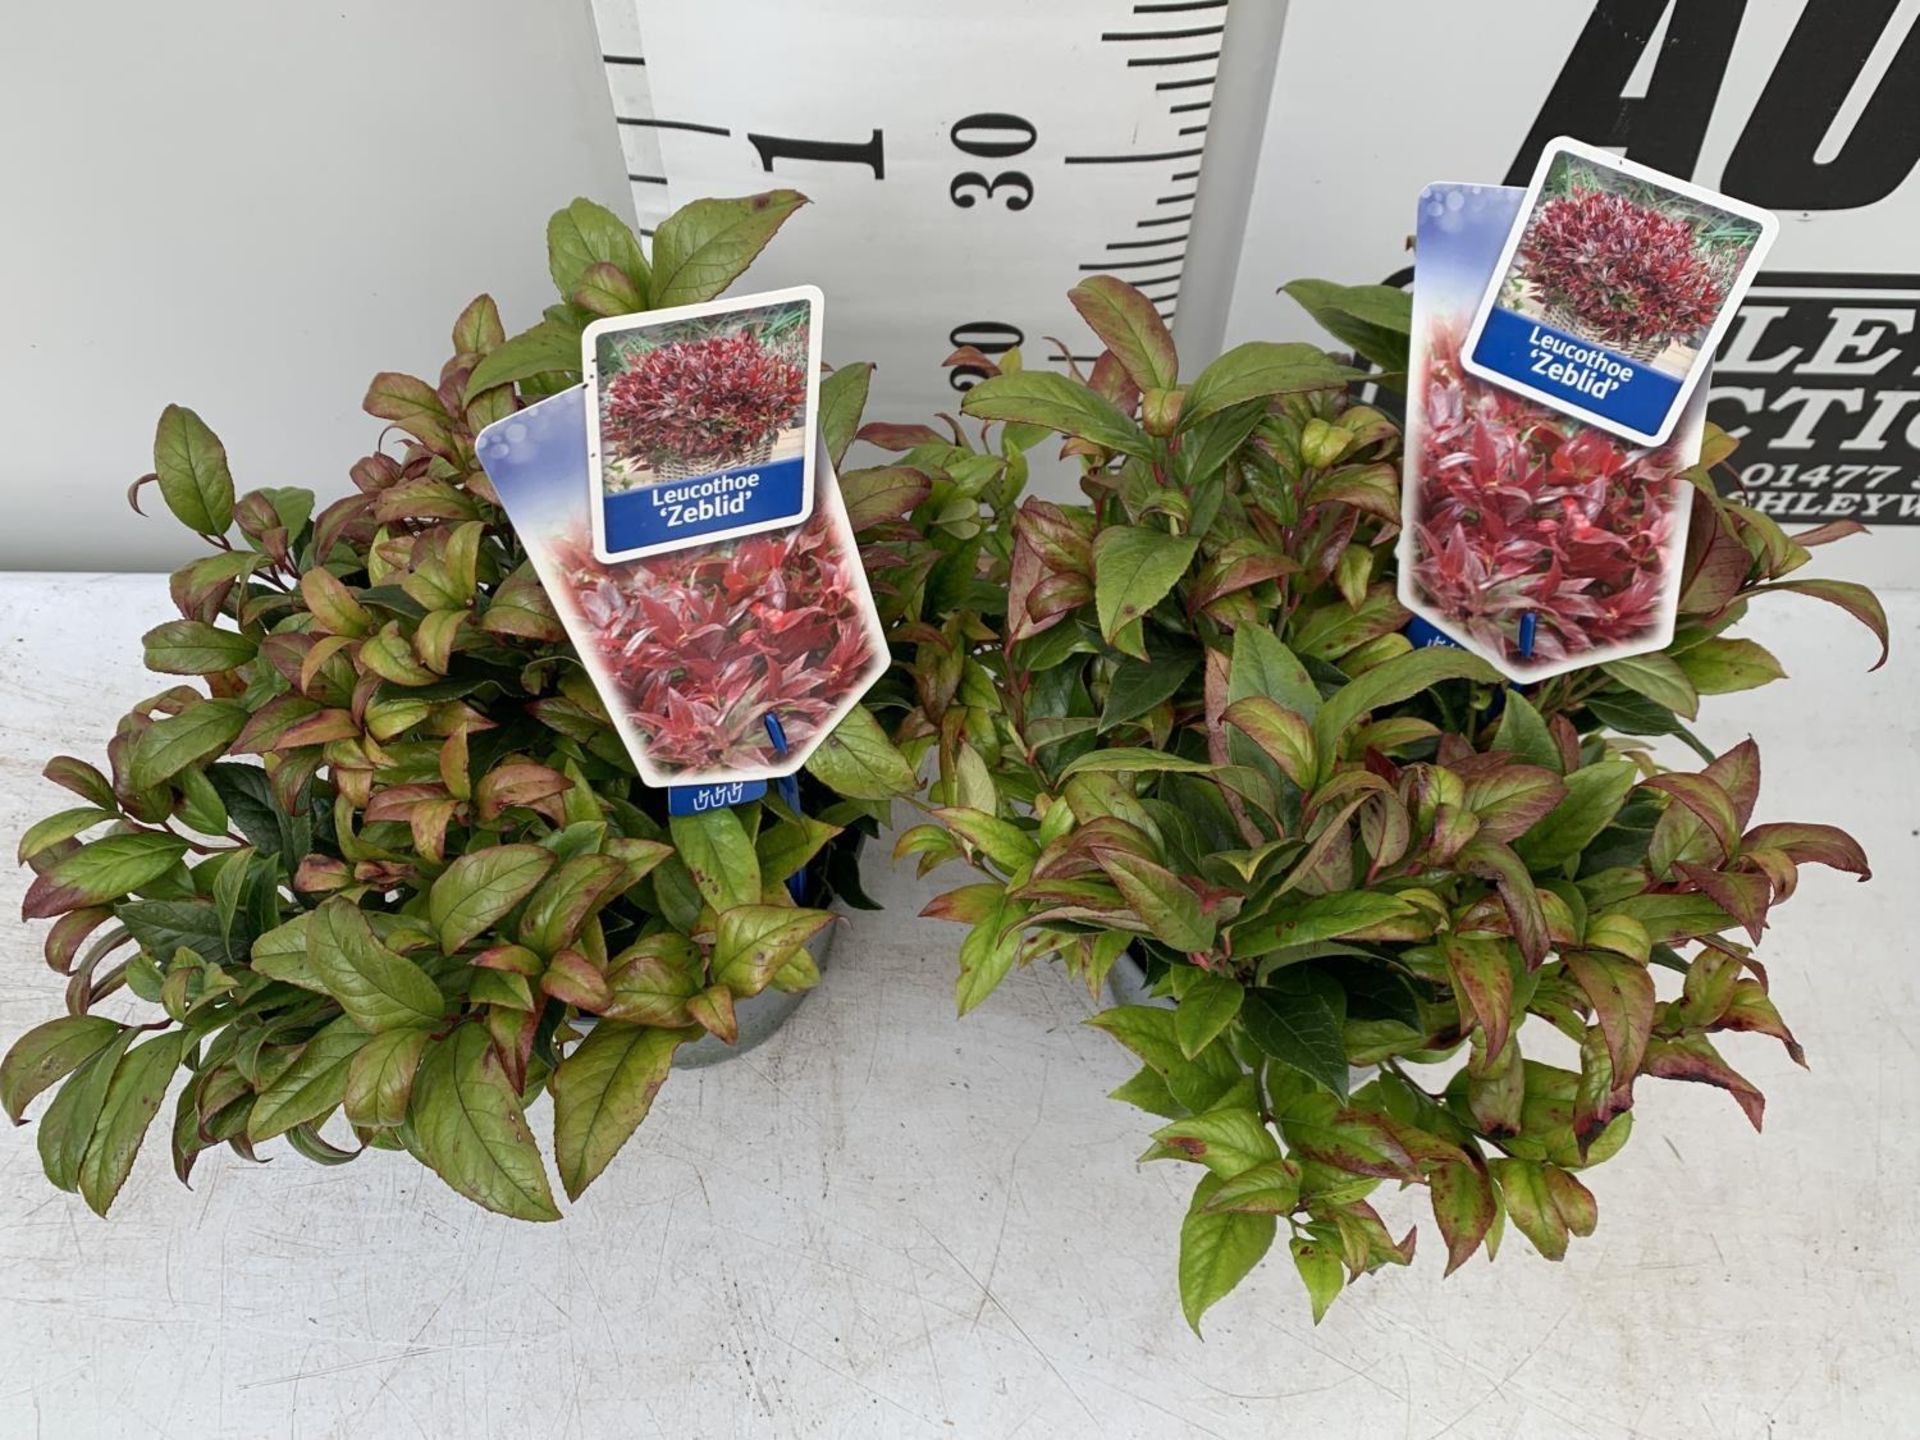 TWO LEUCOTHOE ZEBLID IN 2 LTR POTS 35CM TALL PLUS VAT TO BE SOLD FOR THE TWO - Image 4 of 8